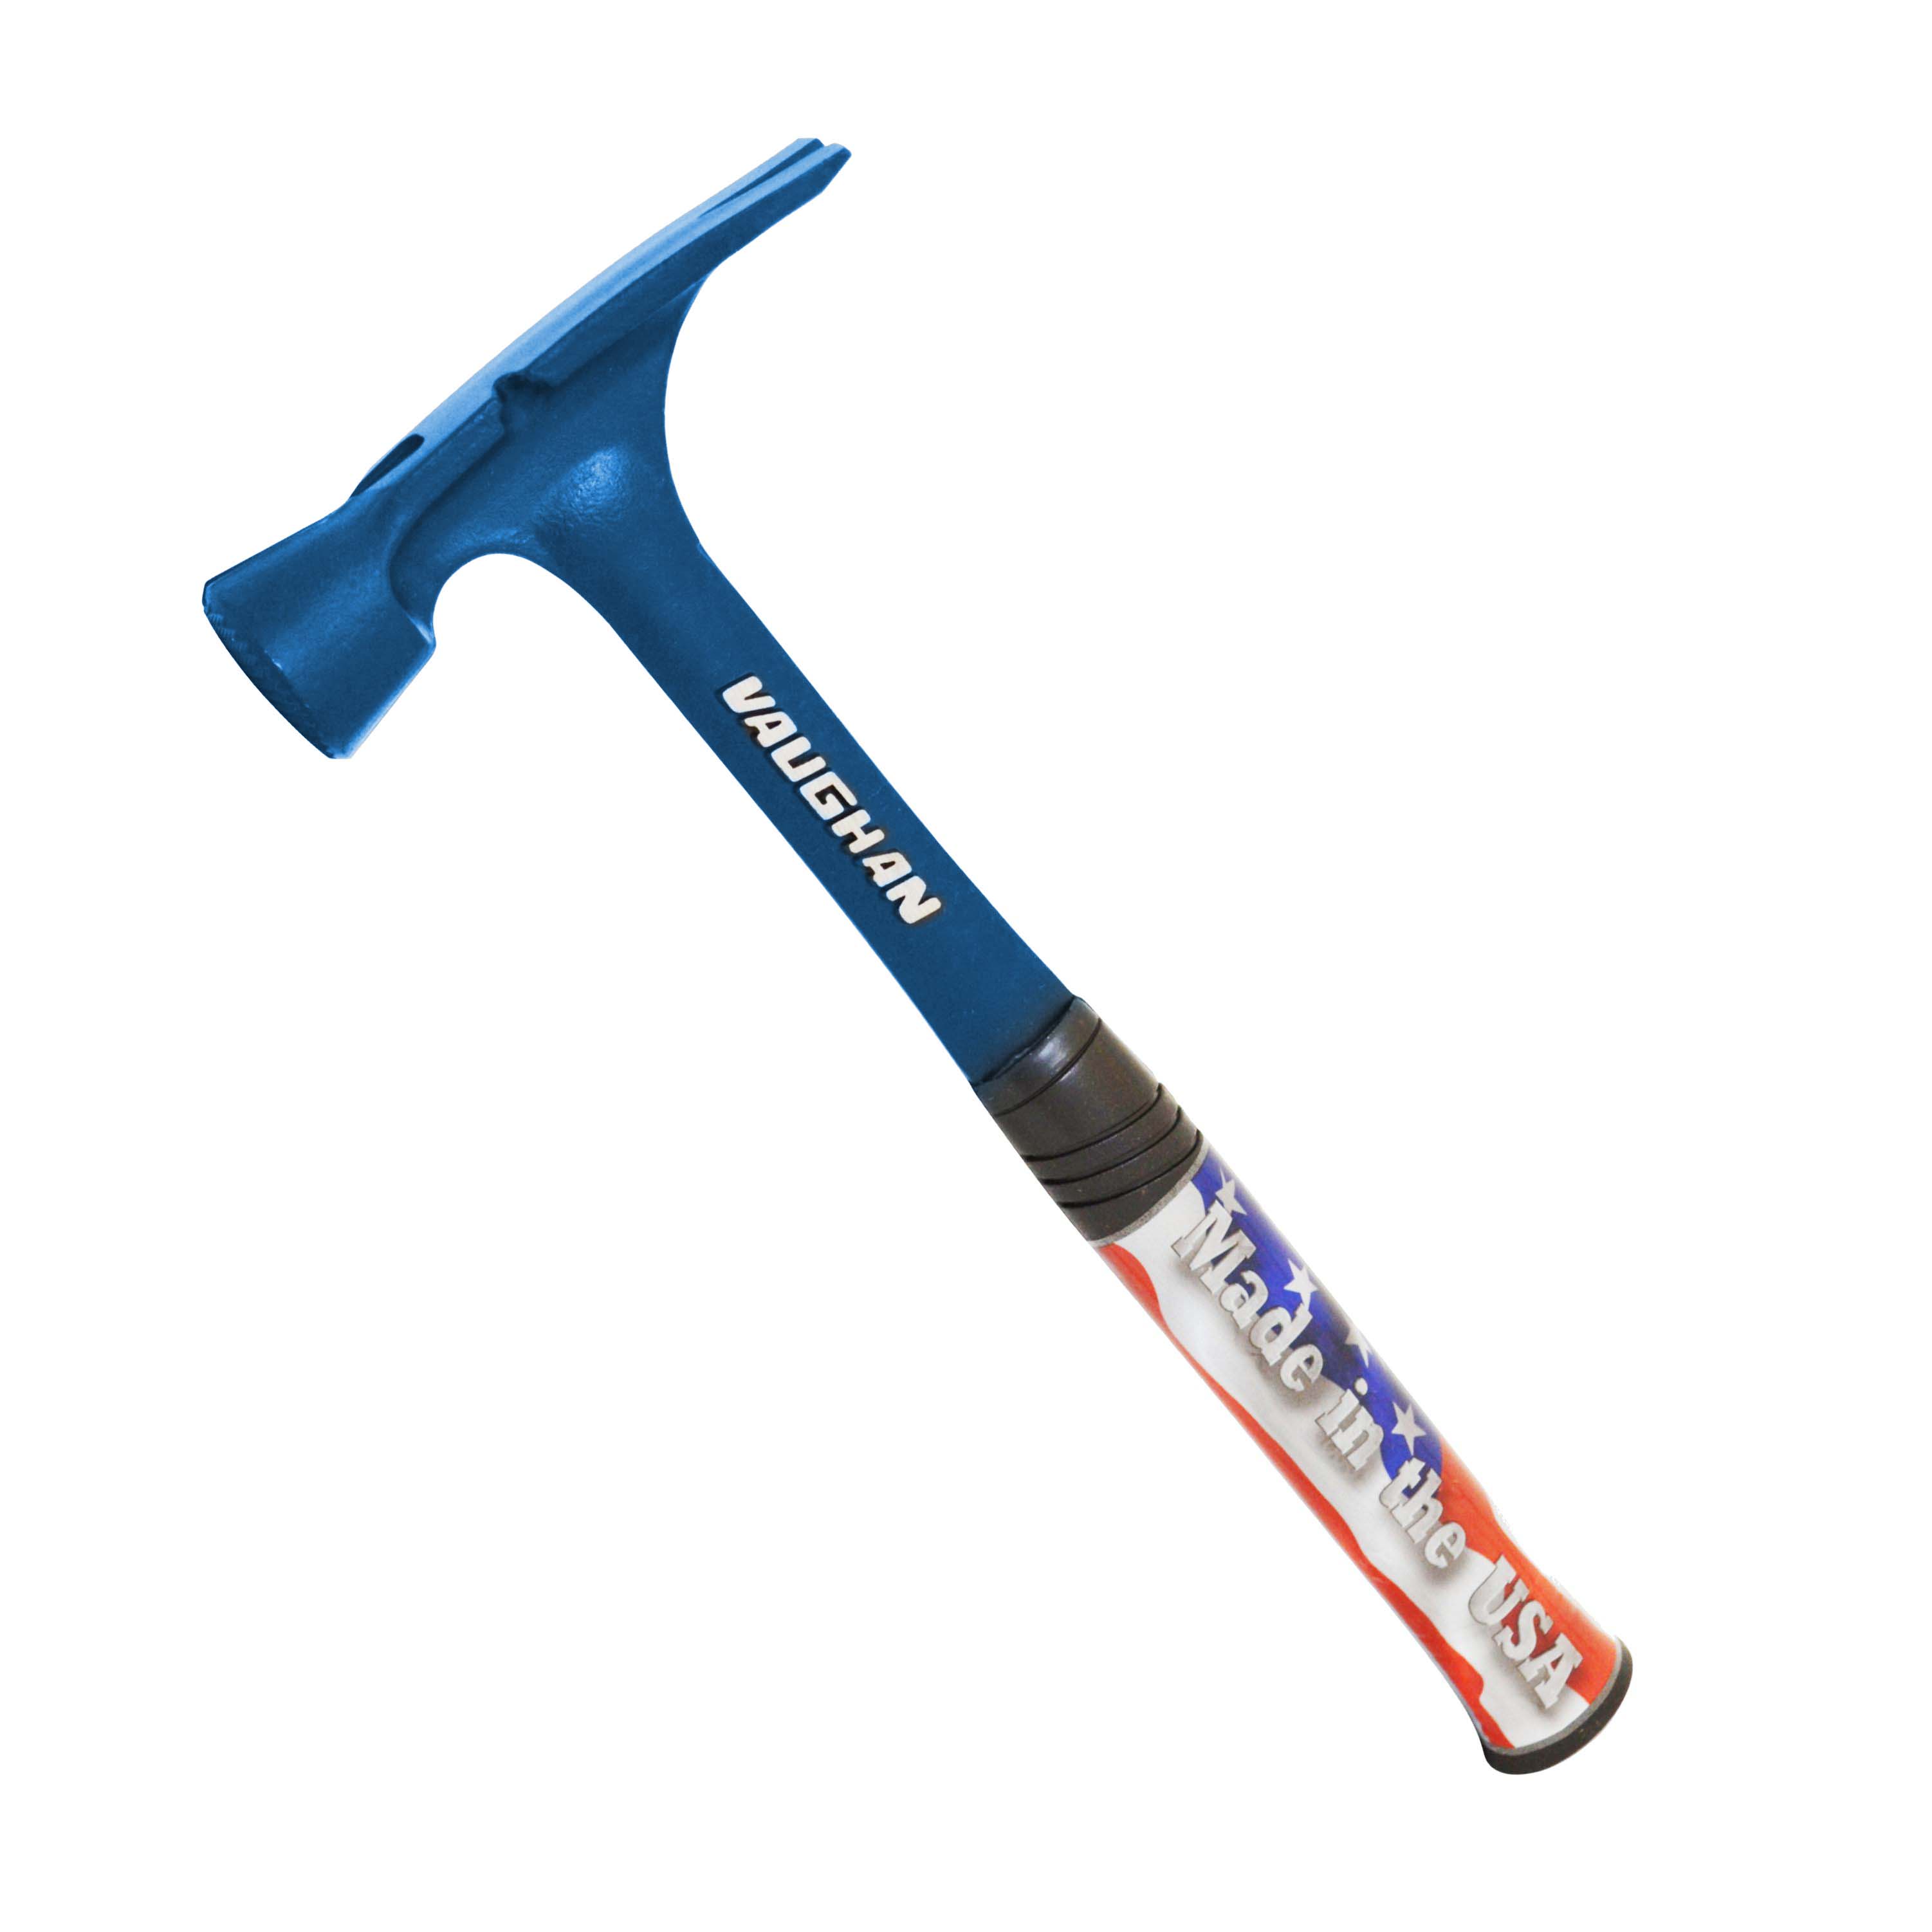 Vaughan 17 oz Steel Milled Face Rip Hammer with Rubber Handle - image 1 of 7